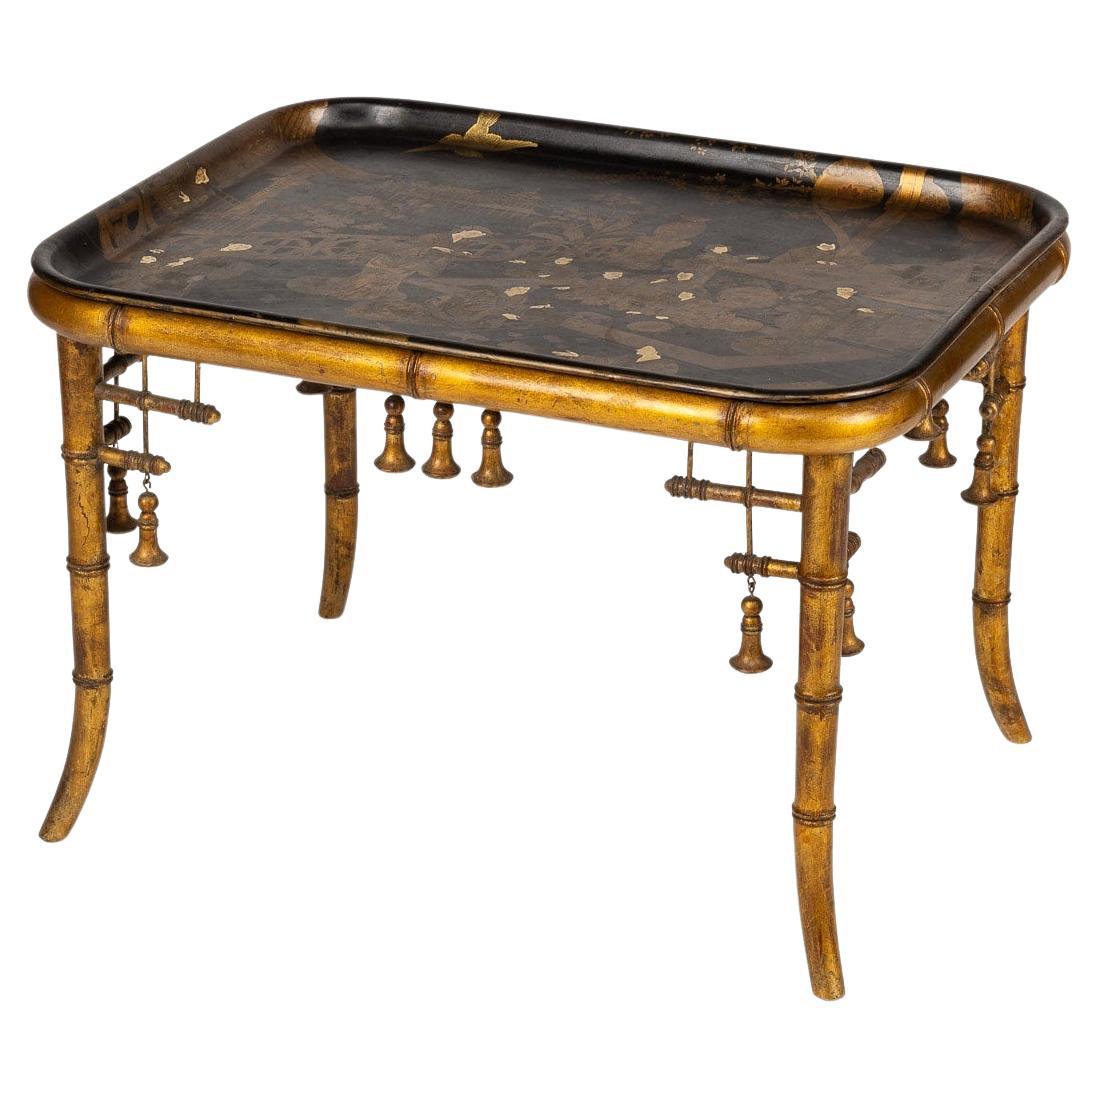 20th Century French Giltwood & Japanese Style Lacquer Table with Tray, C.1880